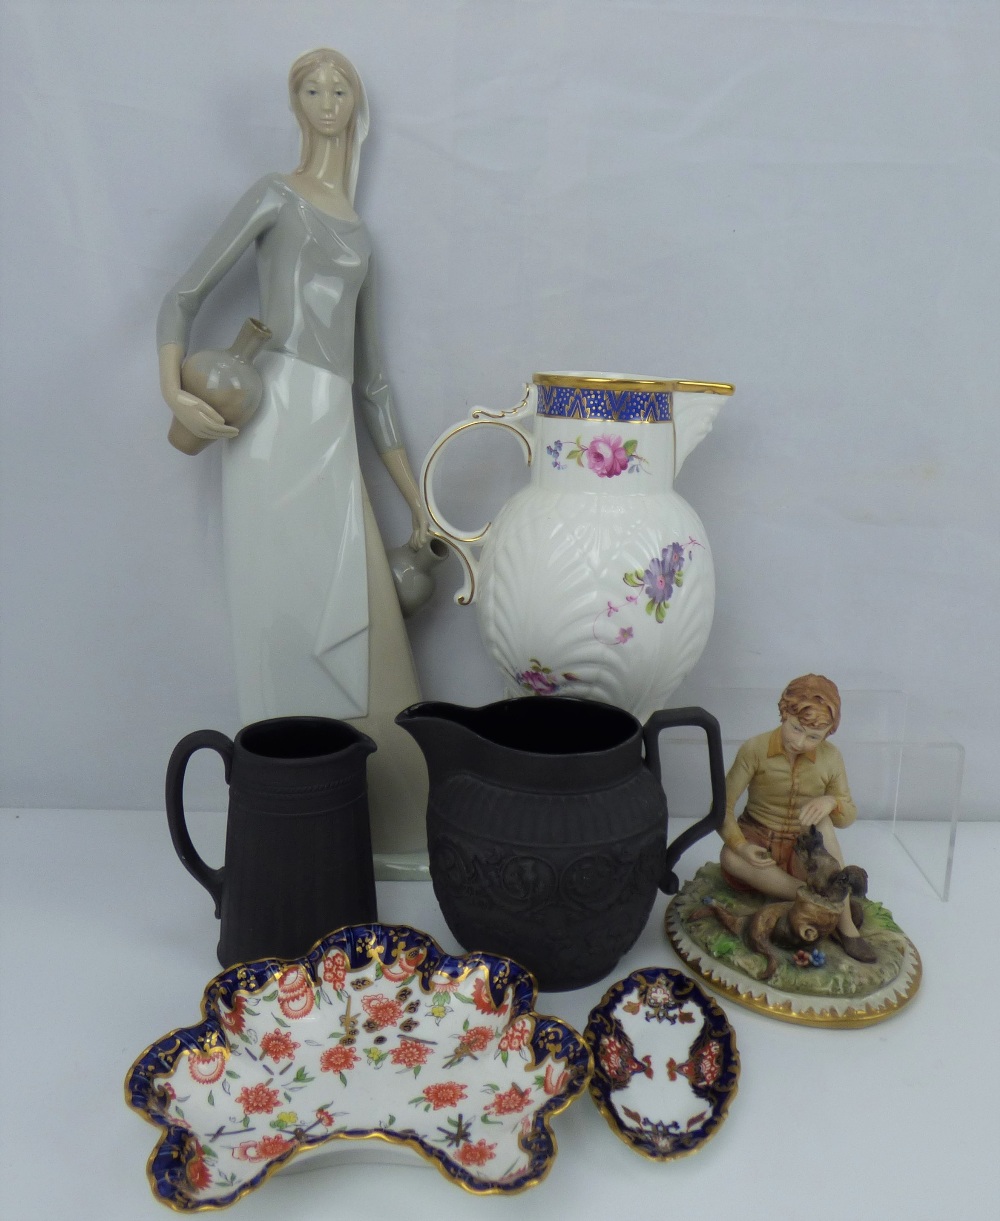 Various items of vintage and antique collectible pottery to include a black basalt milk jug and